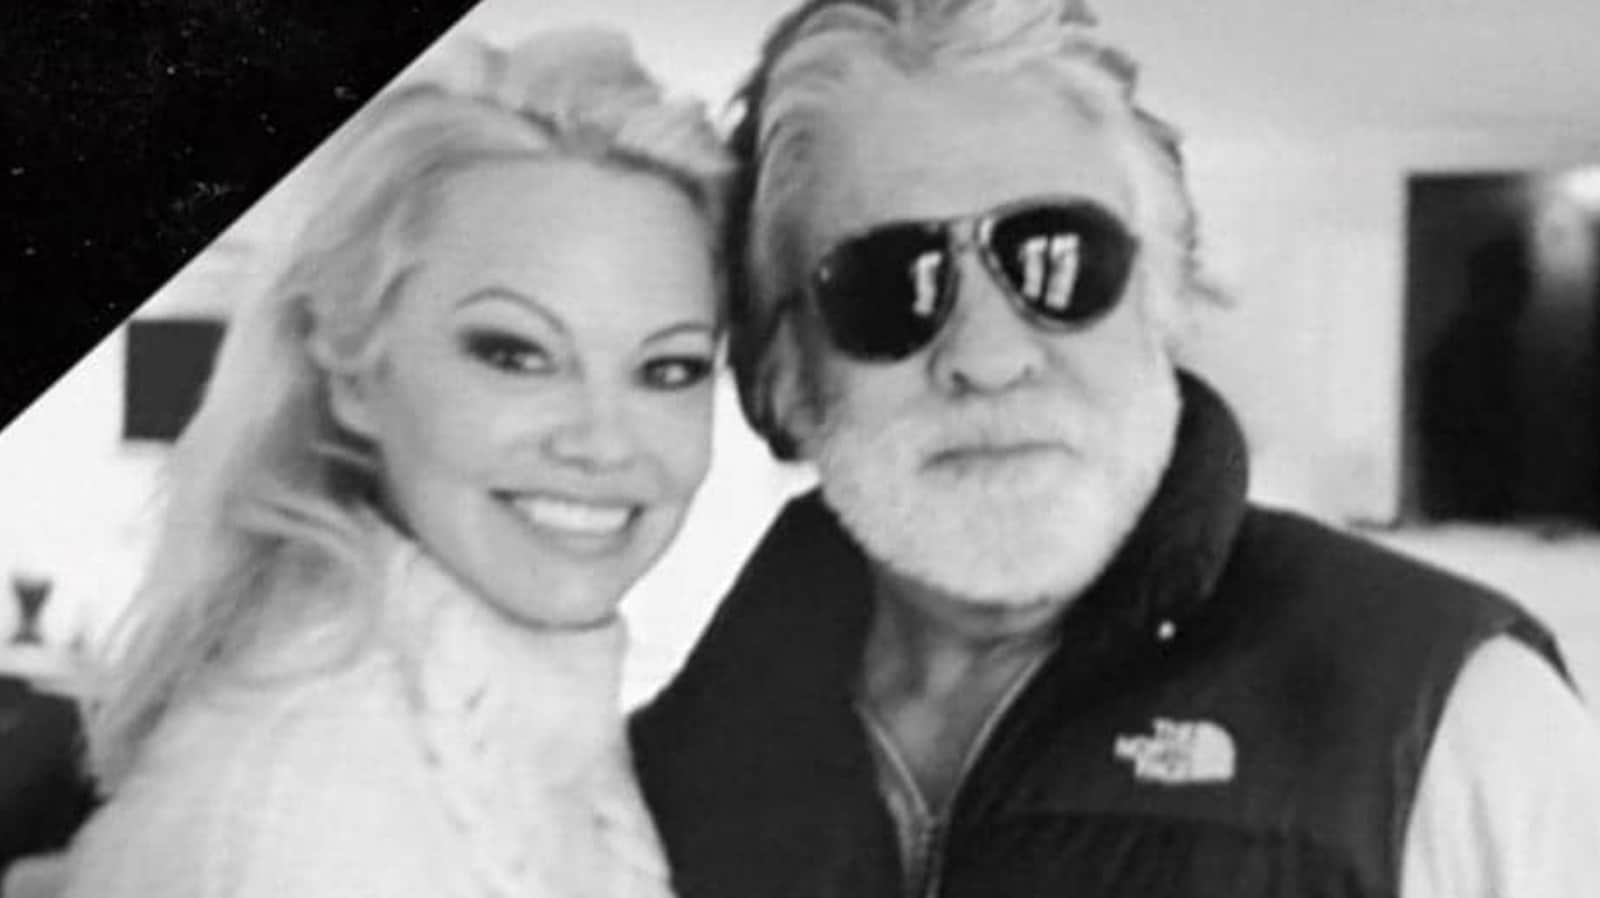 Pamela Anderson’s ex-husband Jon Peters leaves $10 million for her in his will: ‘I’ll all the time love Pamela’